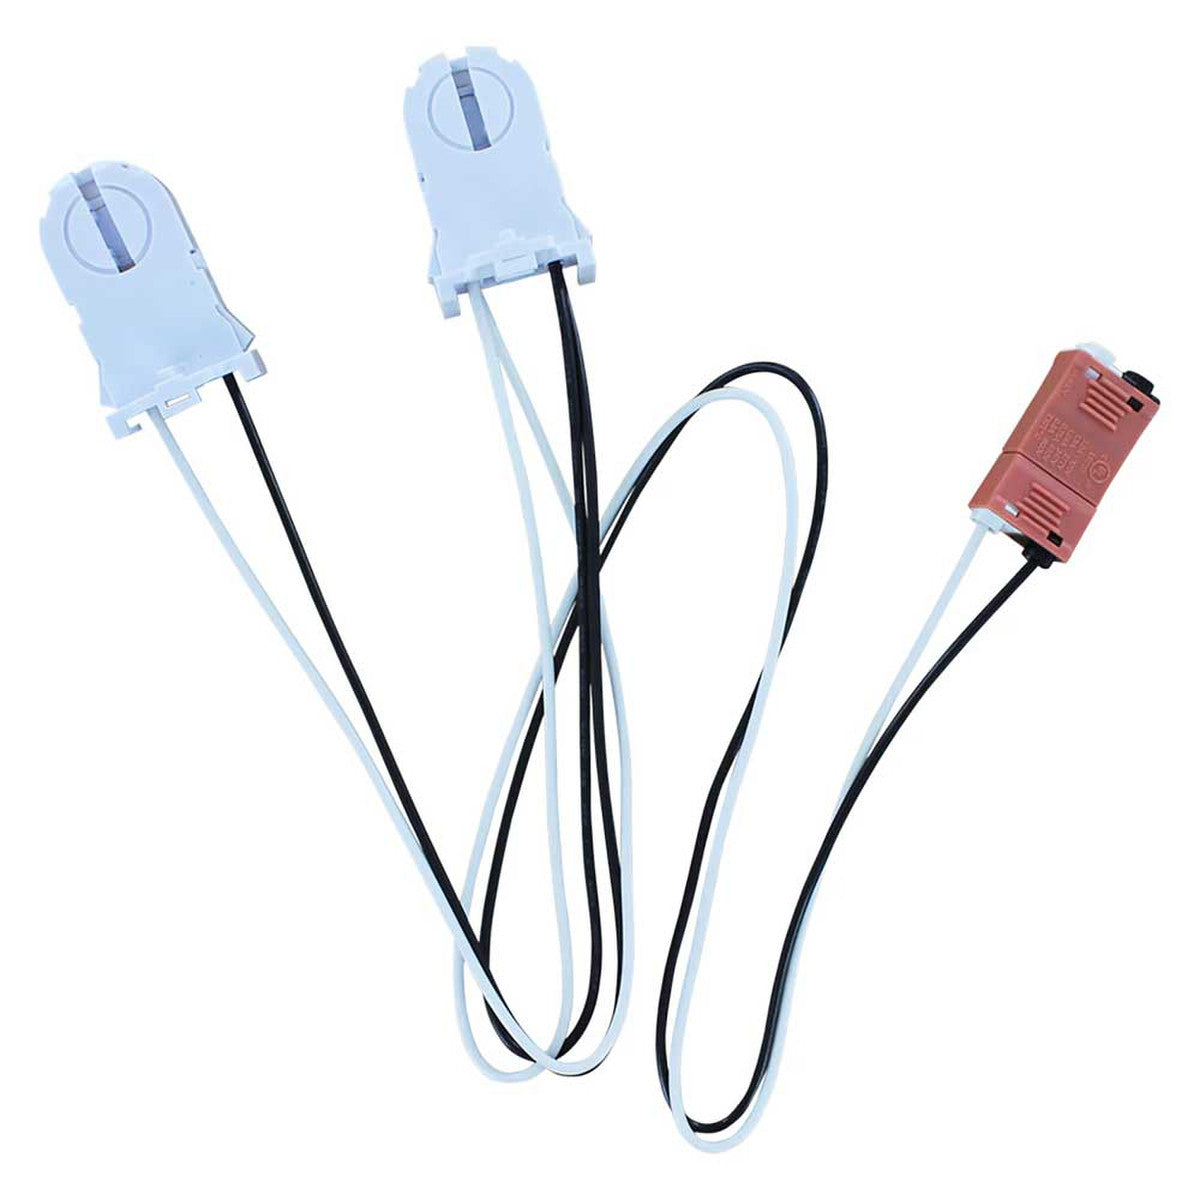 2-Lamp Wiring Harness with Tall Non-shunted Sockets for LED Tubes